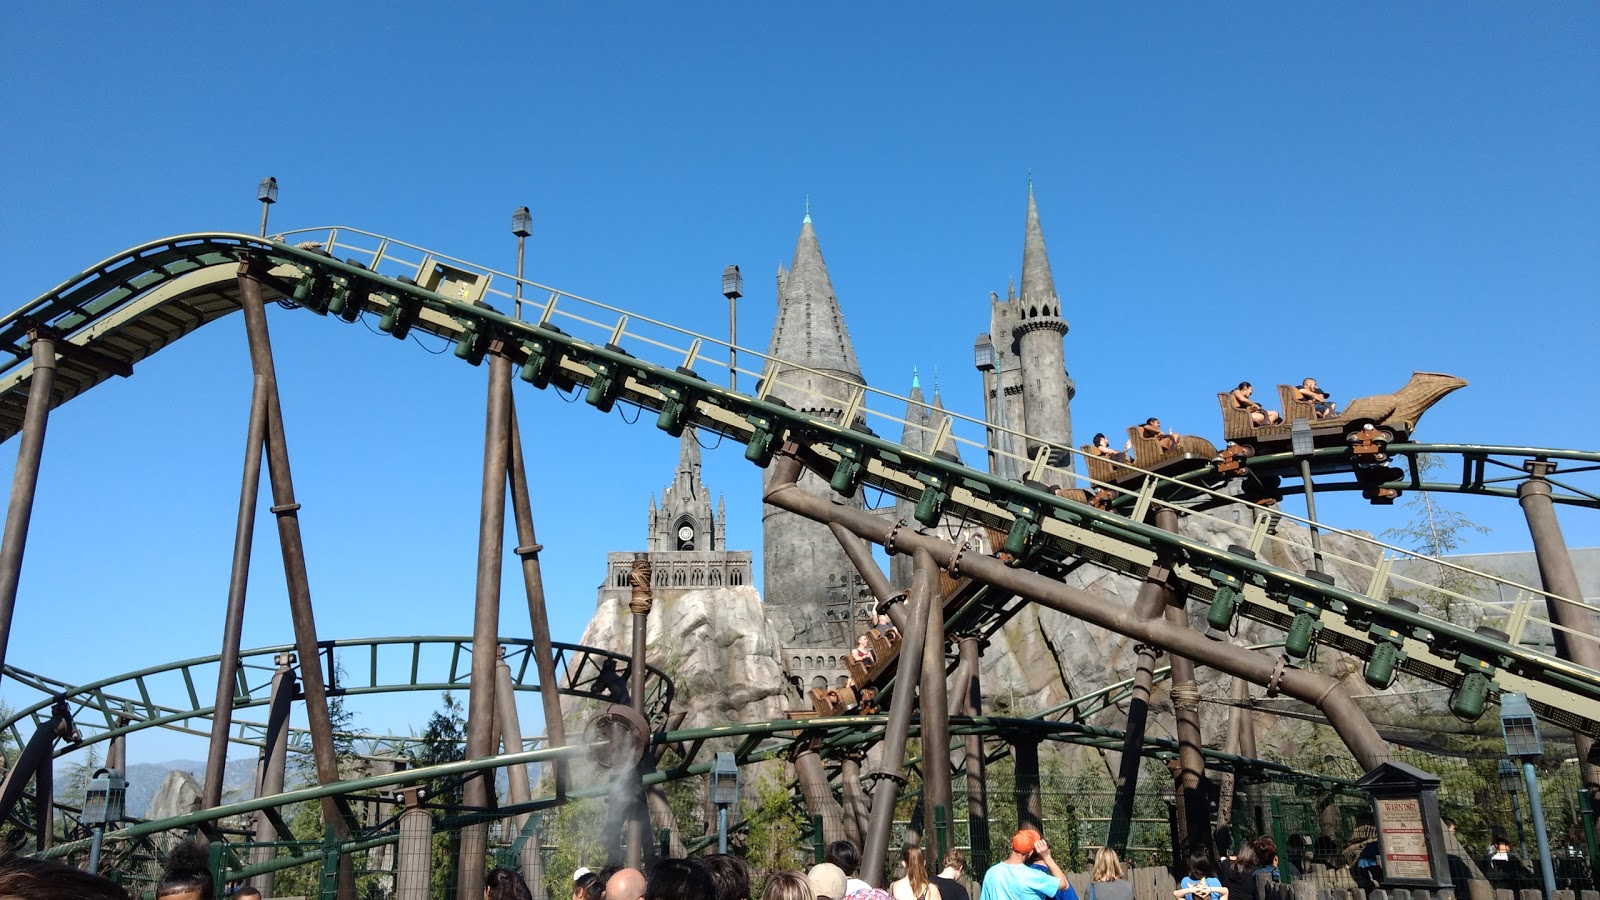 Member The Wizarding World Of Harry Potter in Universal City CA